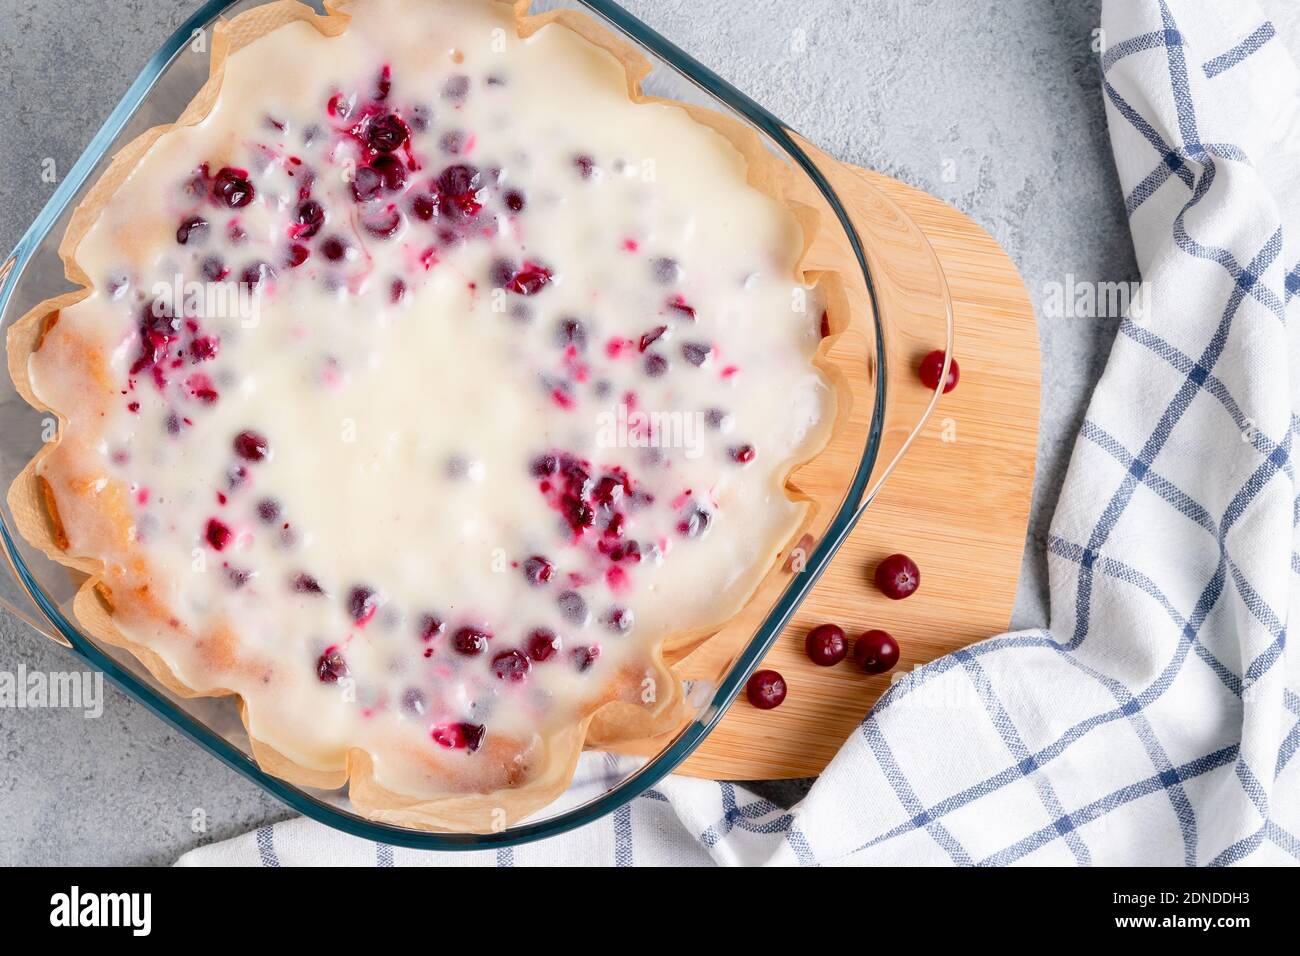 Homemade cranberry and sour cream pie in a glass baking dish. Top view Stock Photo